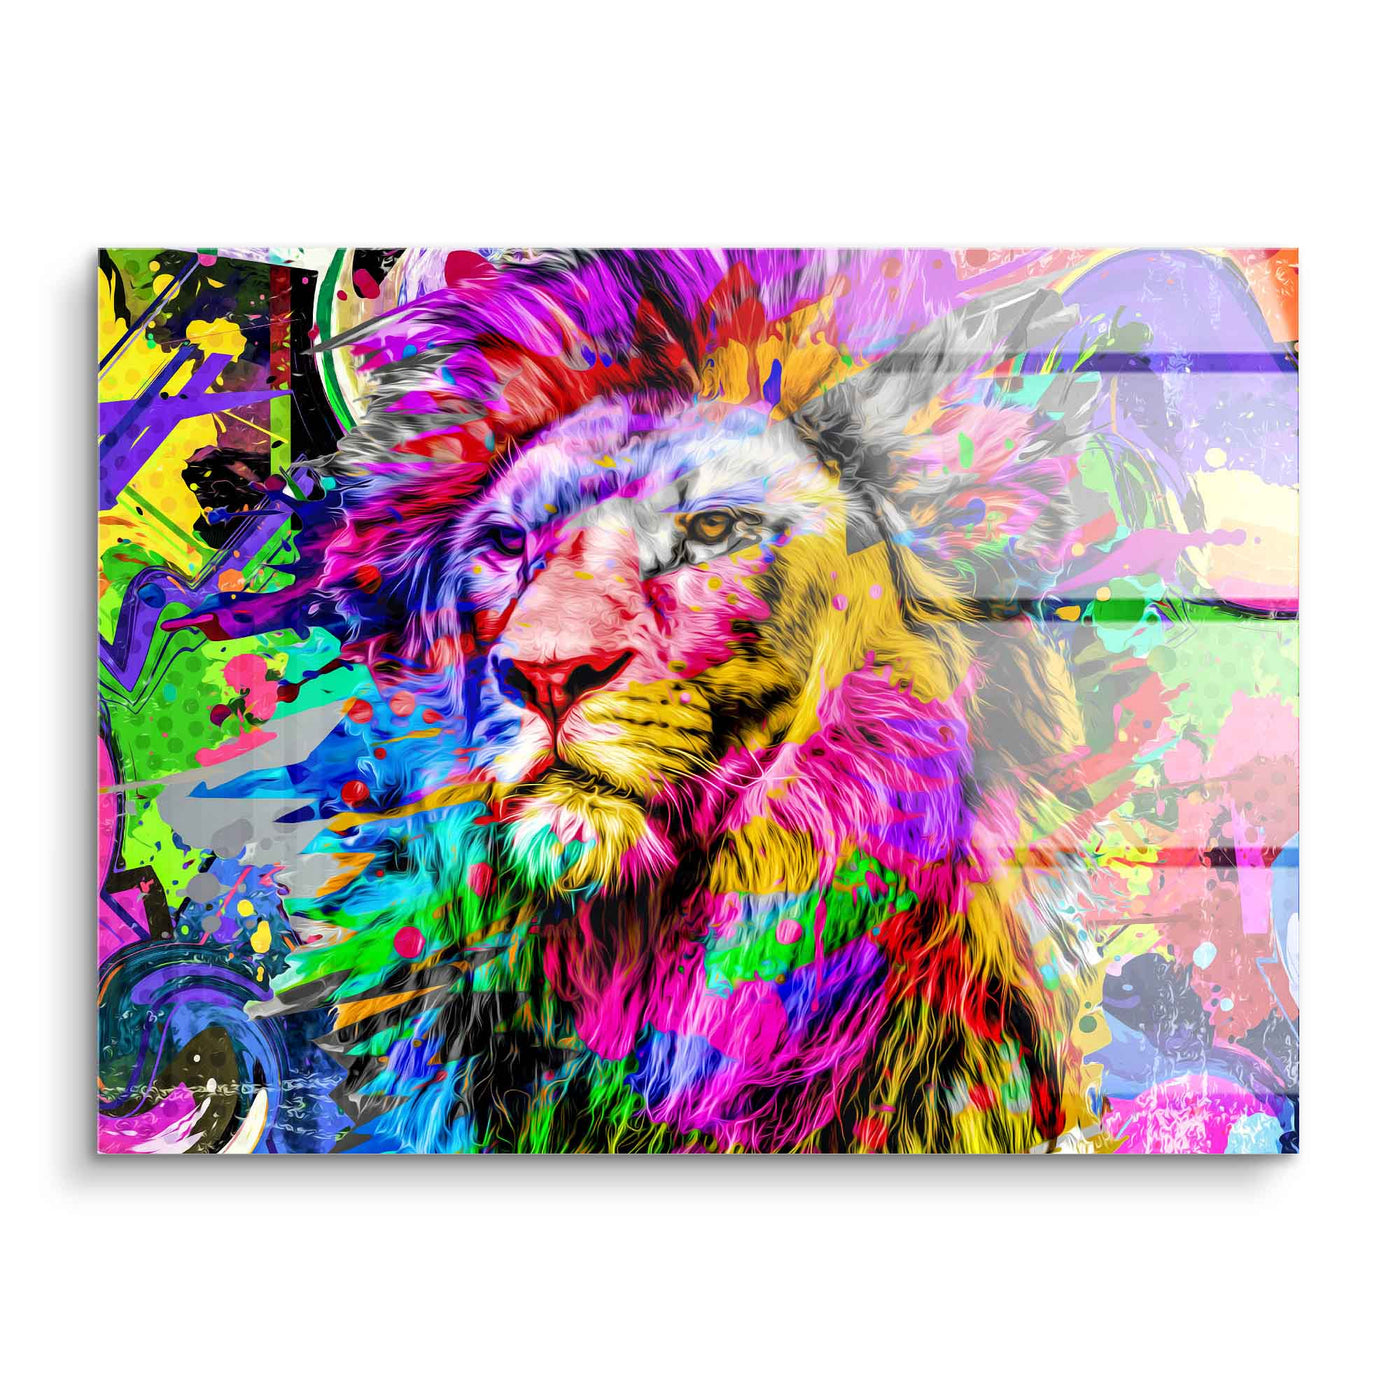 Colorful Lion King